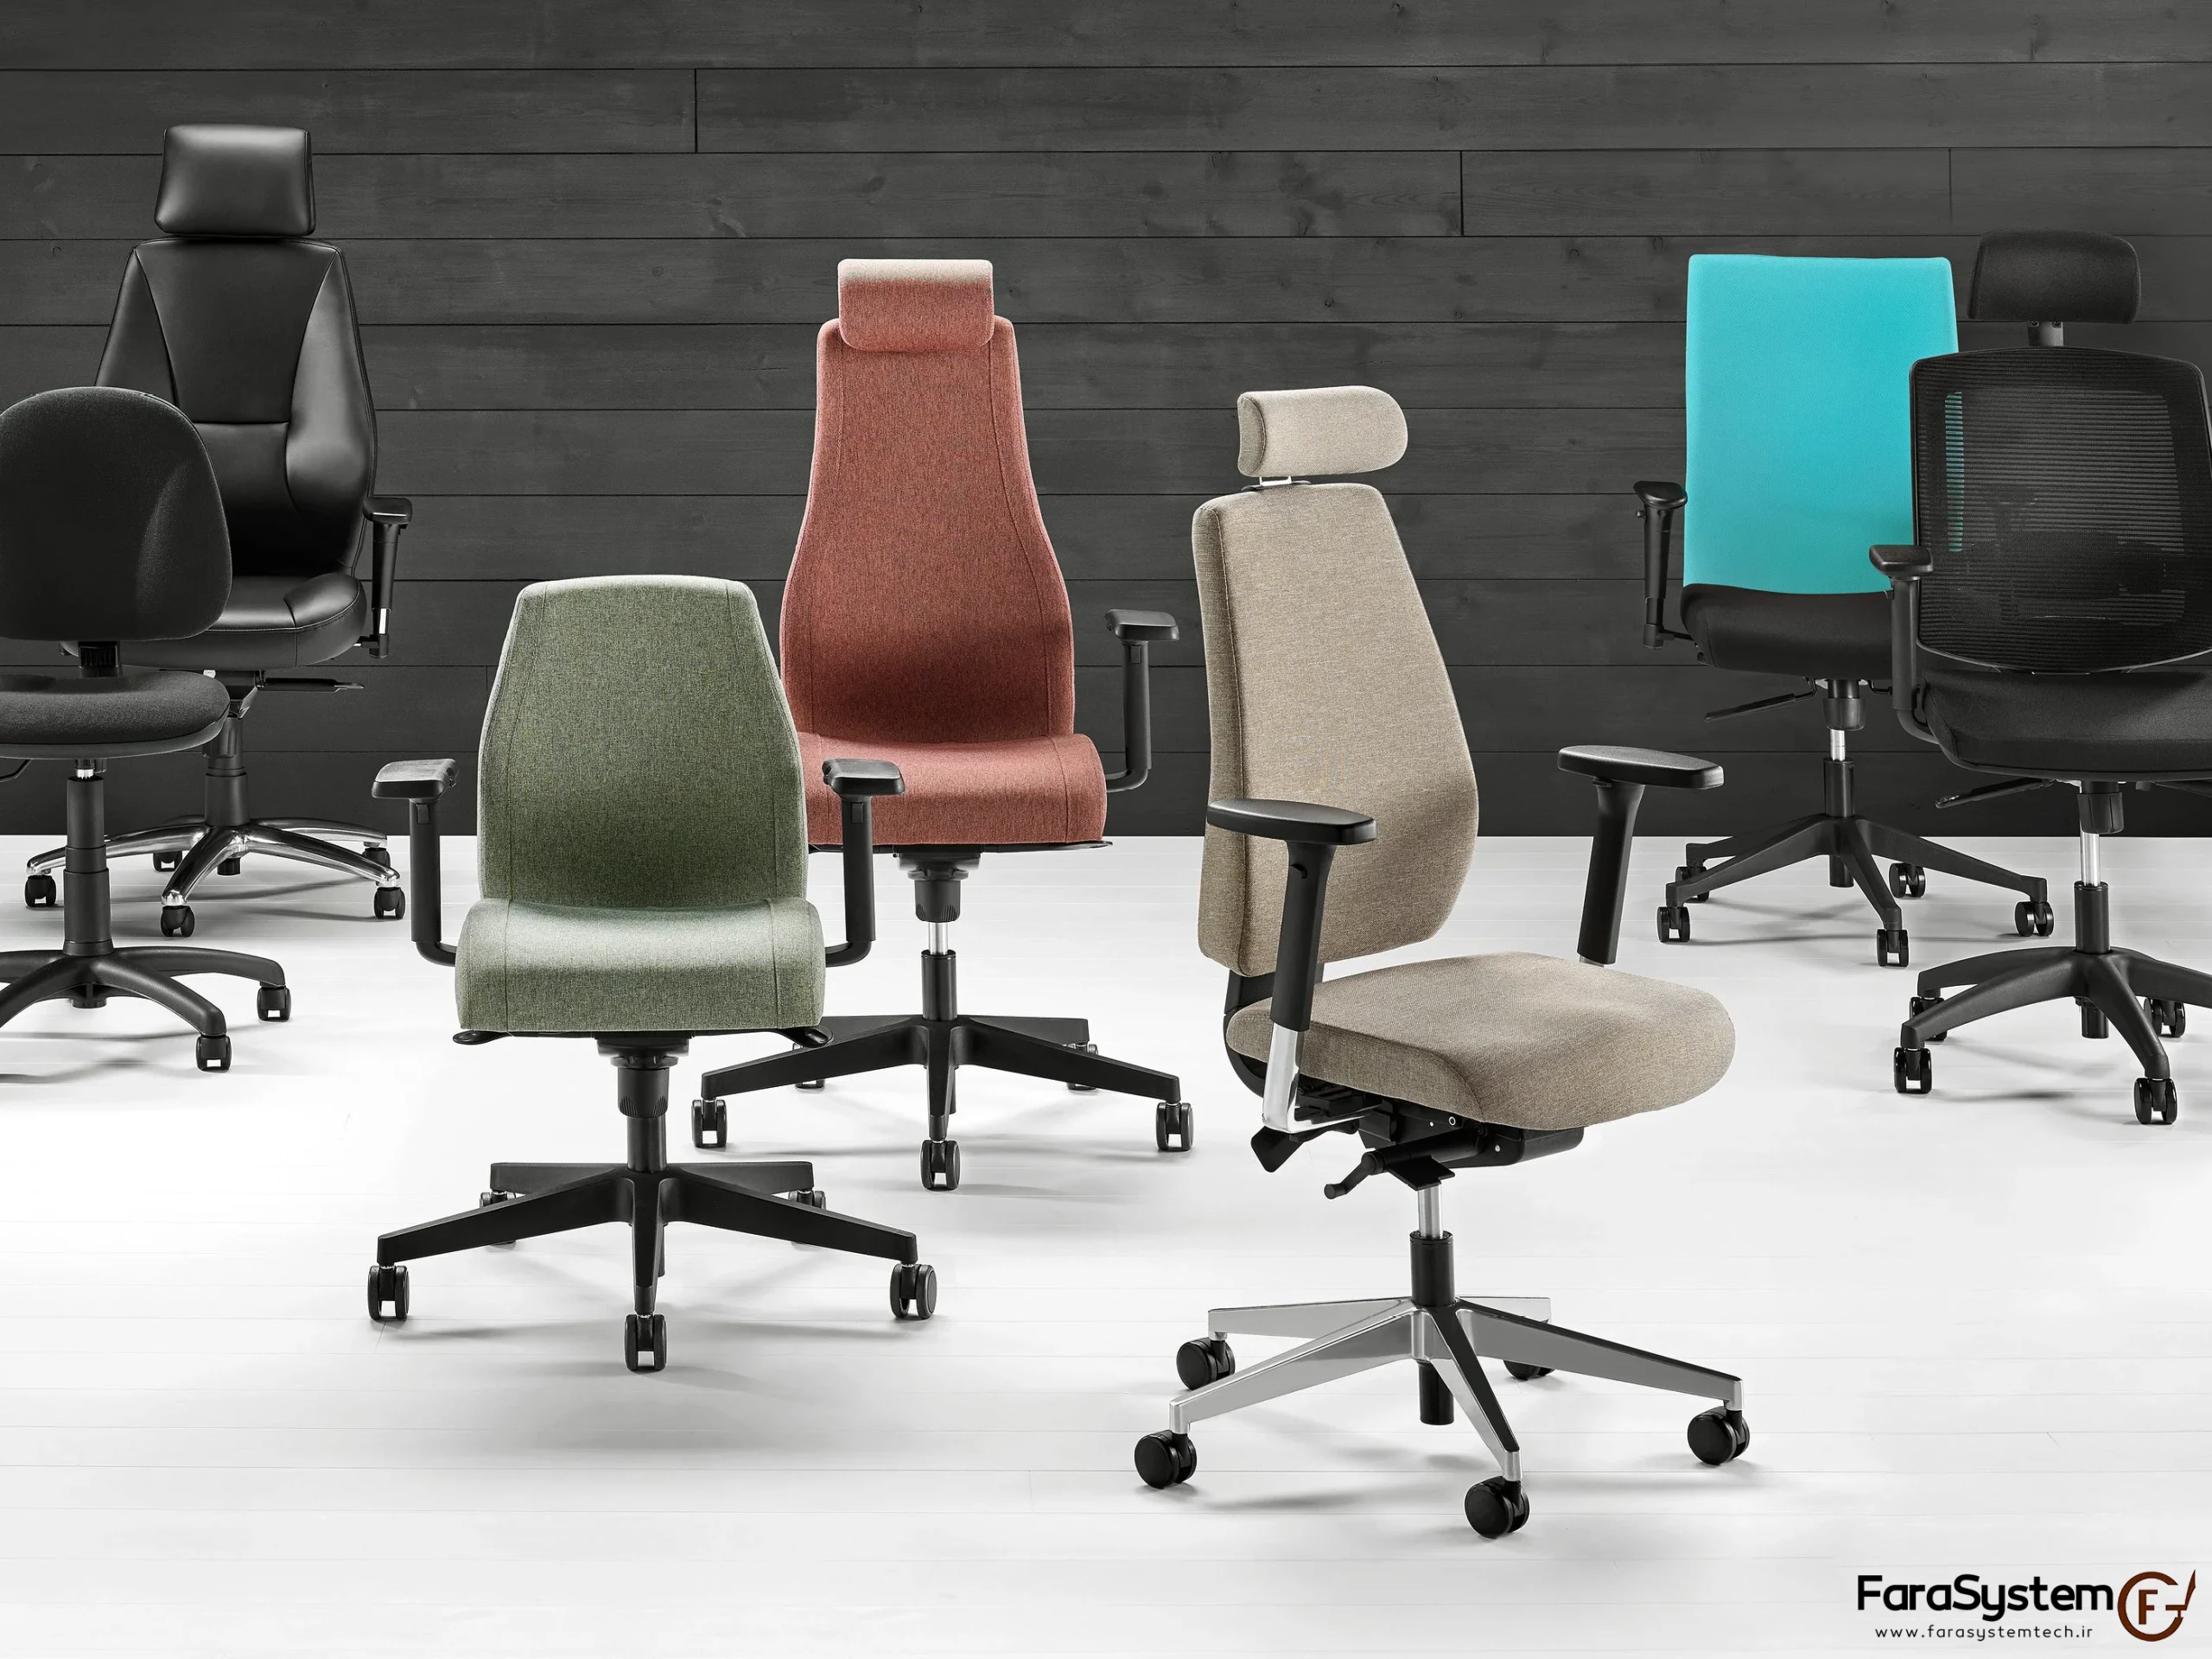 What are the different types of office chairs to choose from?